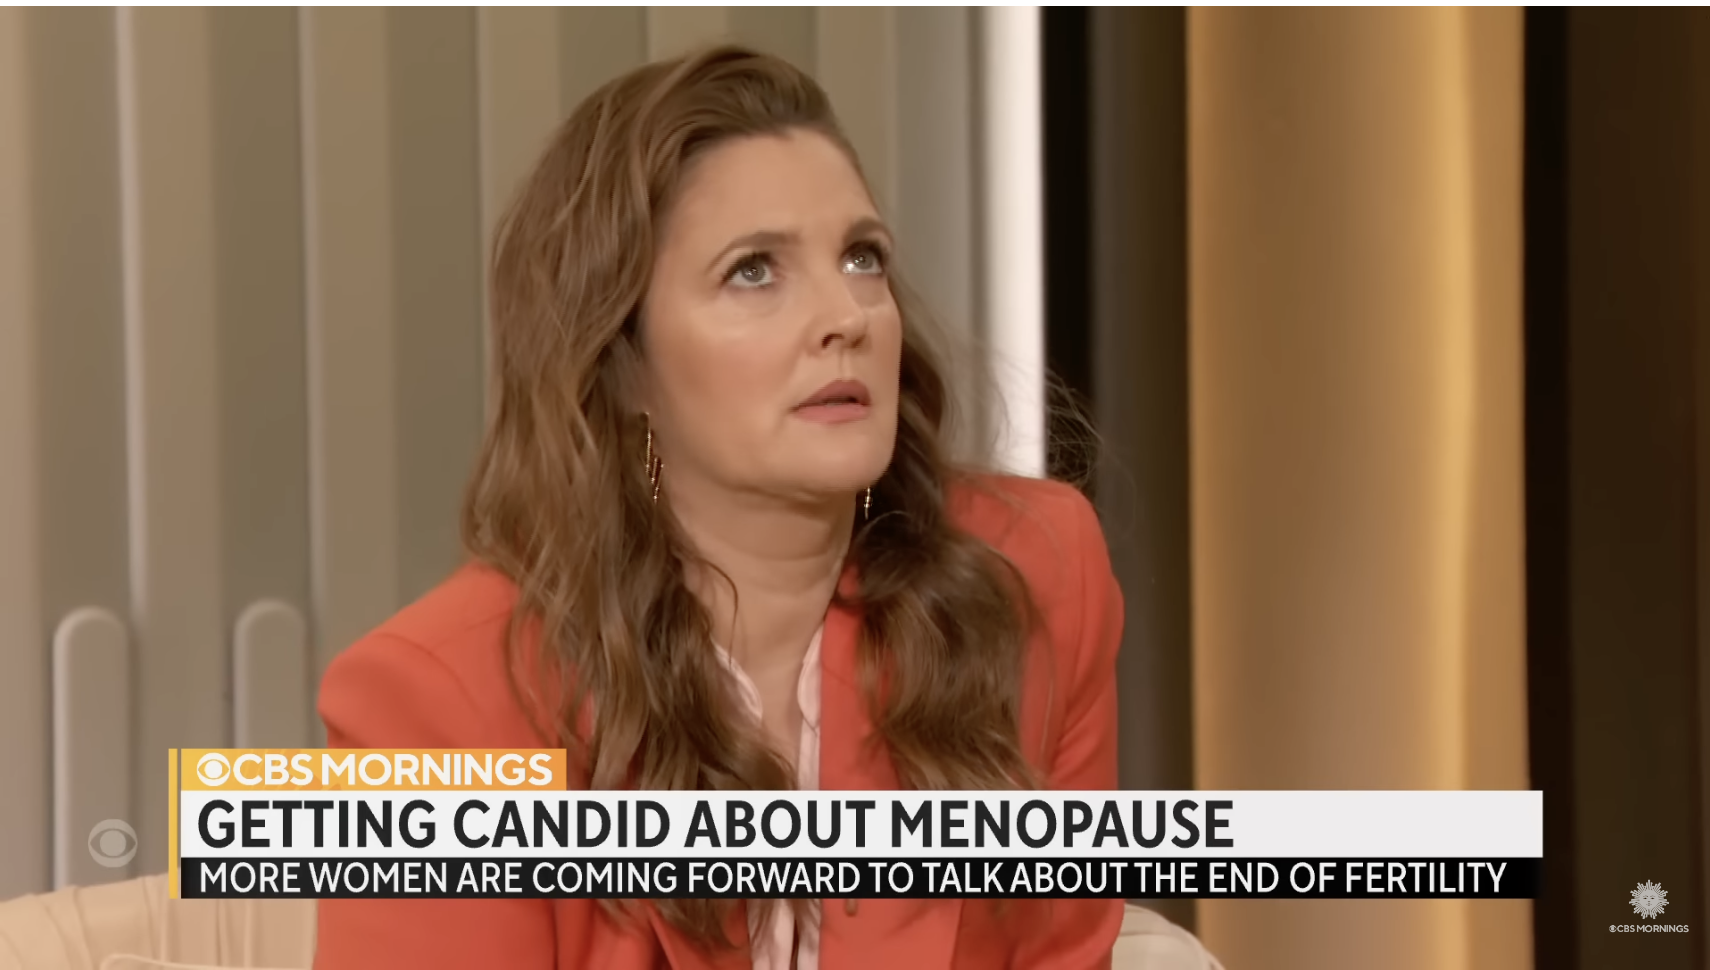 Drew Barrymore Nude Pussy - Drew Barrymore Opens Up About Perimenopause